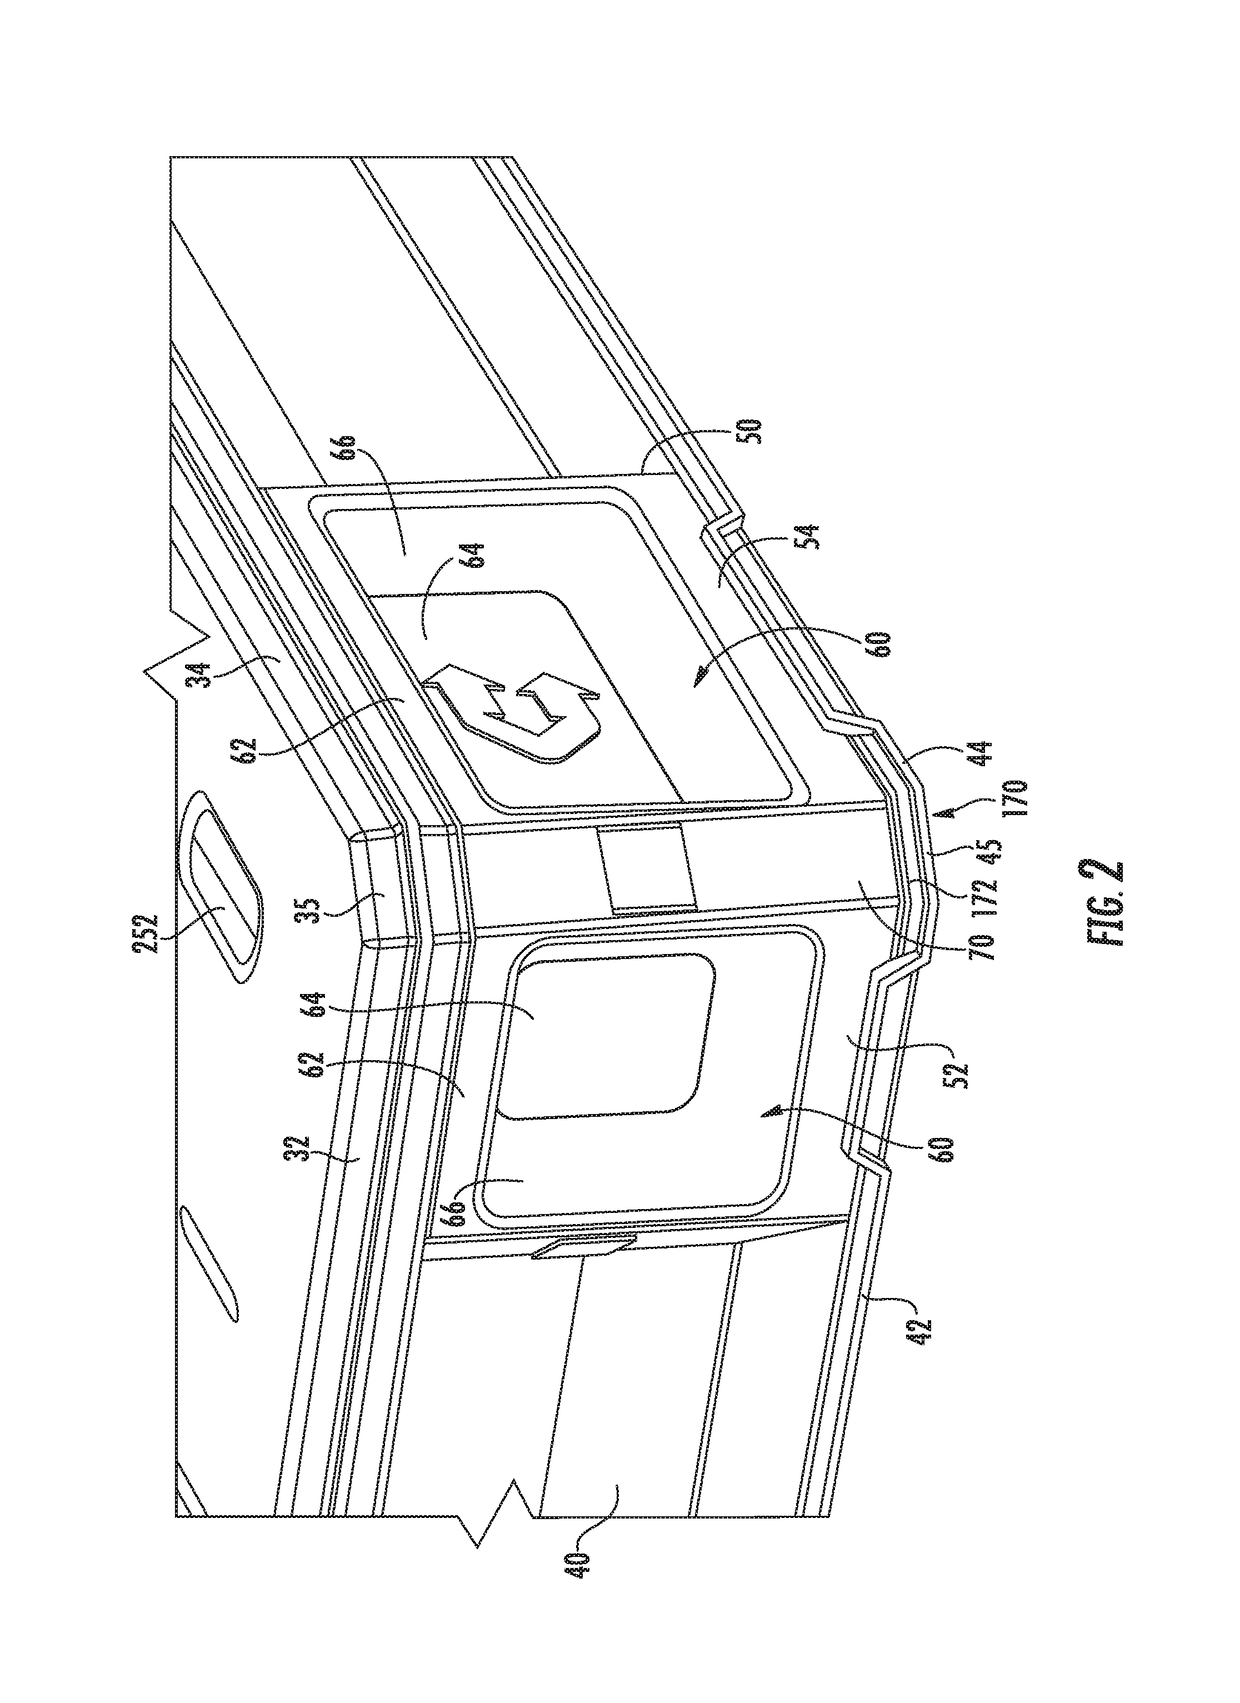 Plastic pallet with centerline markings and associated methods